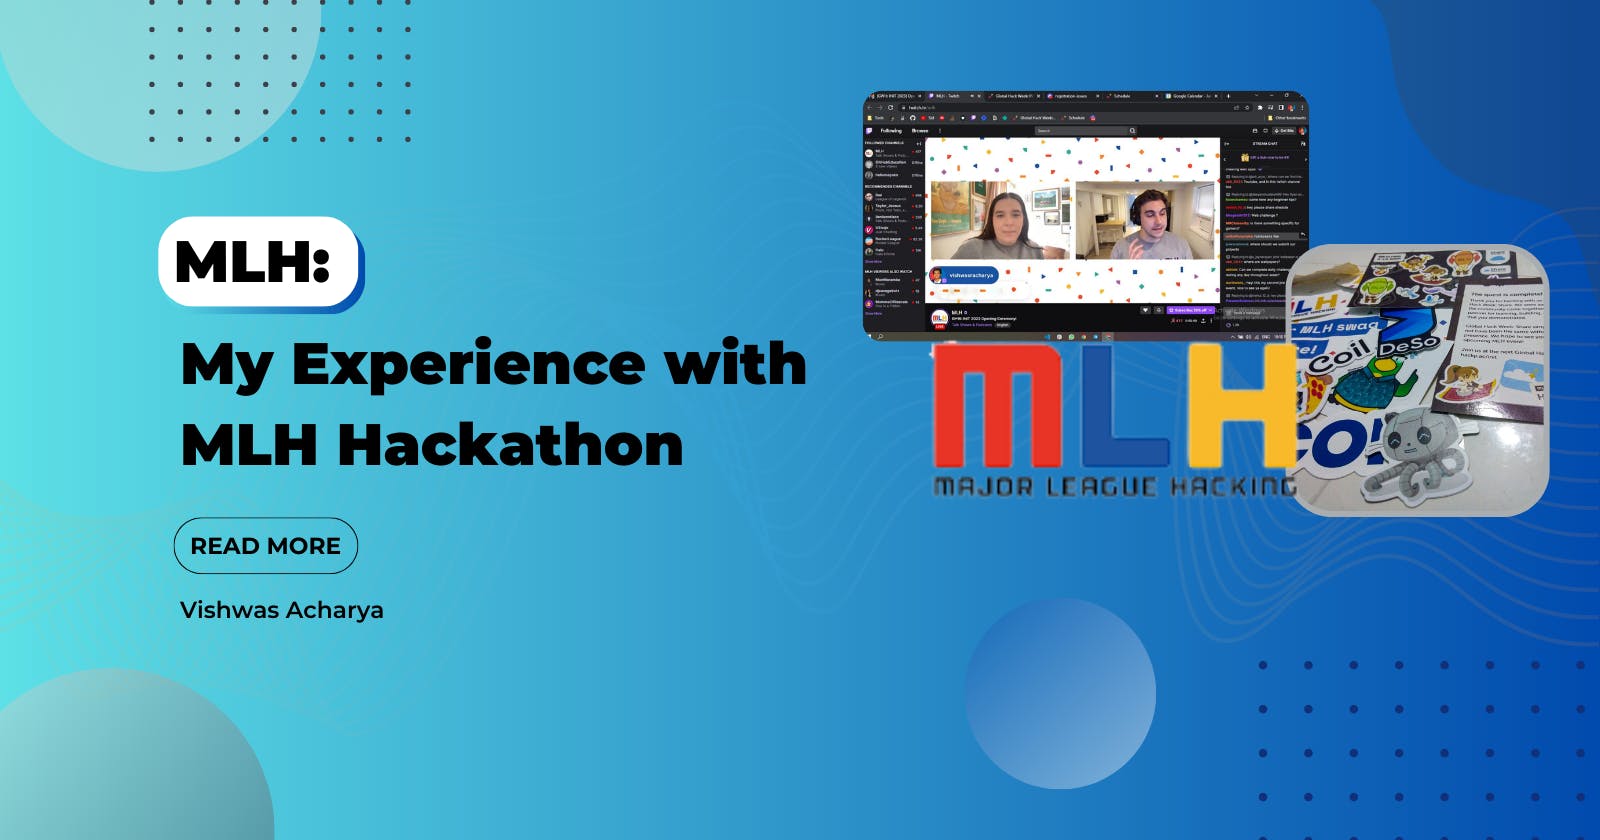 My Experience with MLH Hackathon